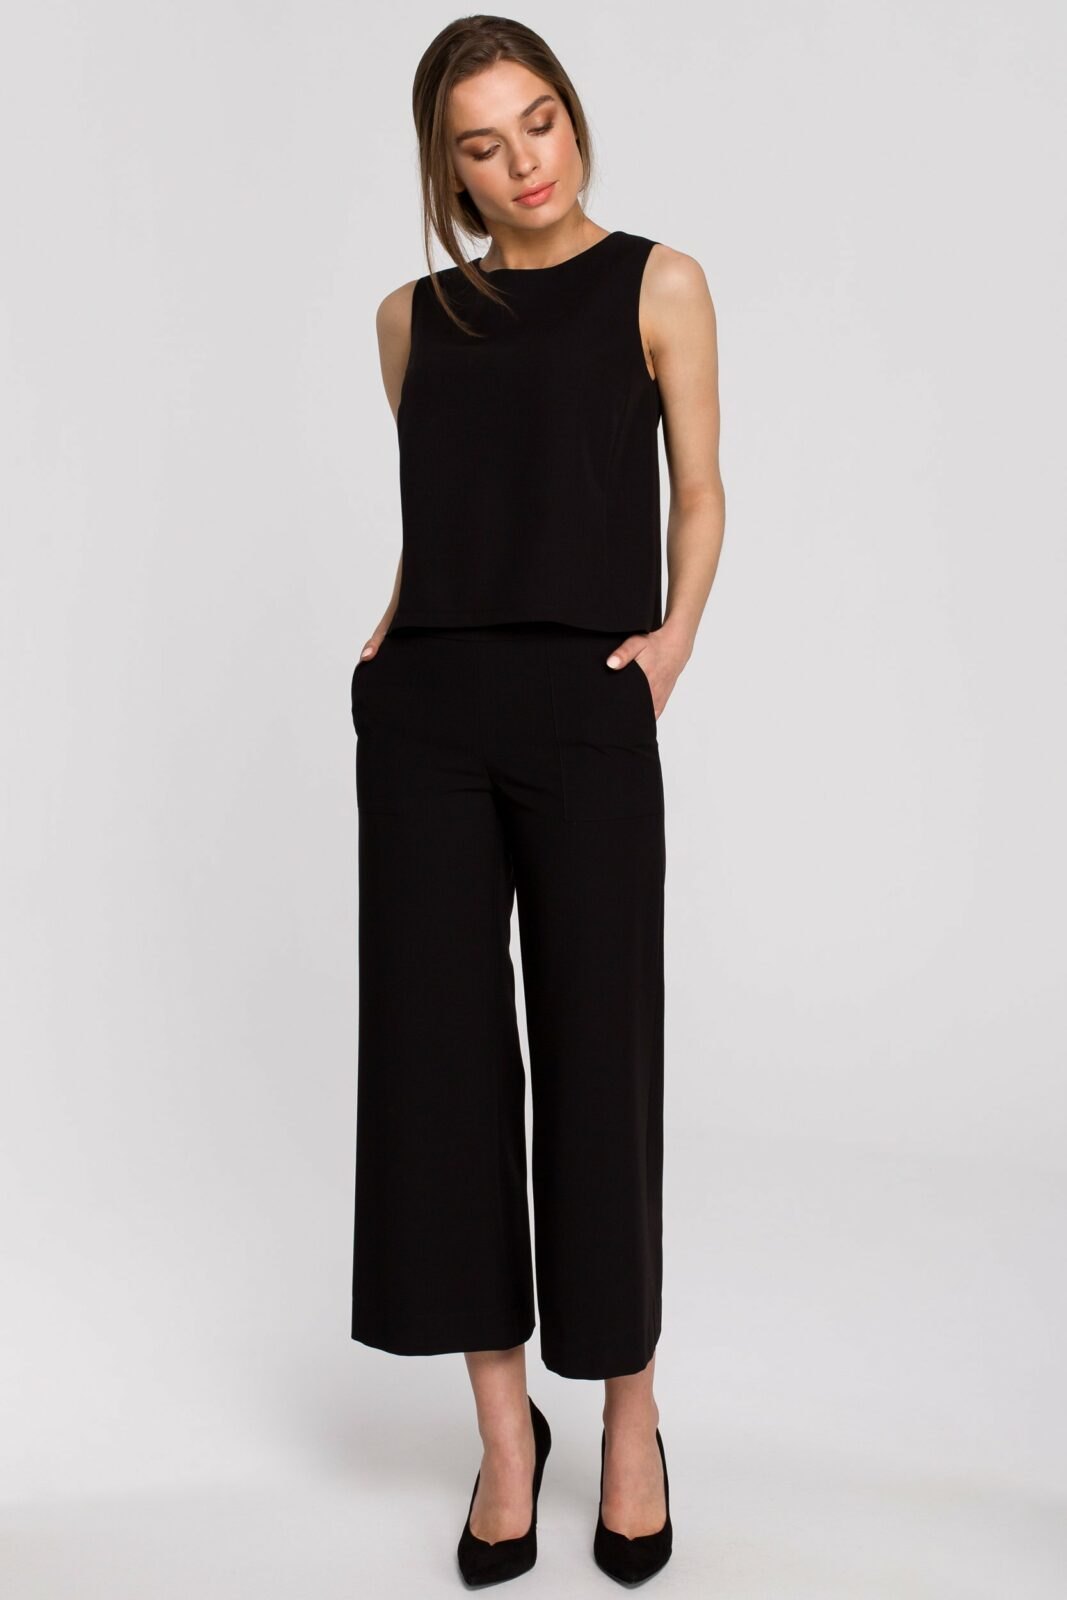 Stylove Woman's Trousers